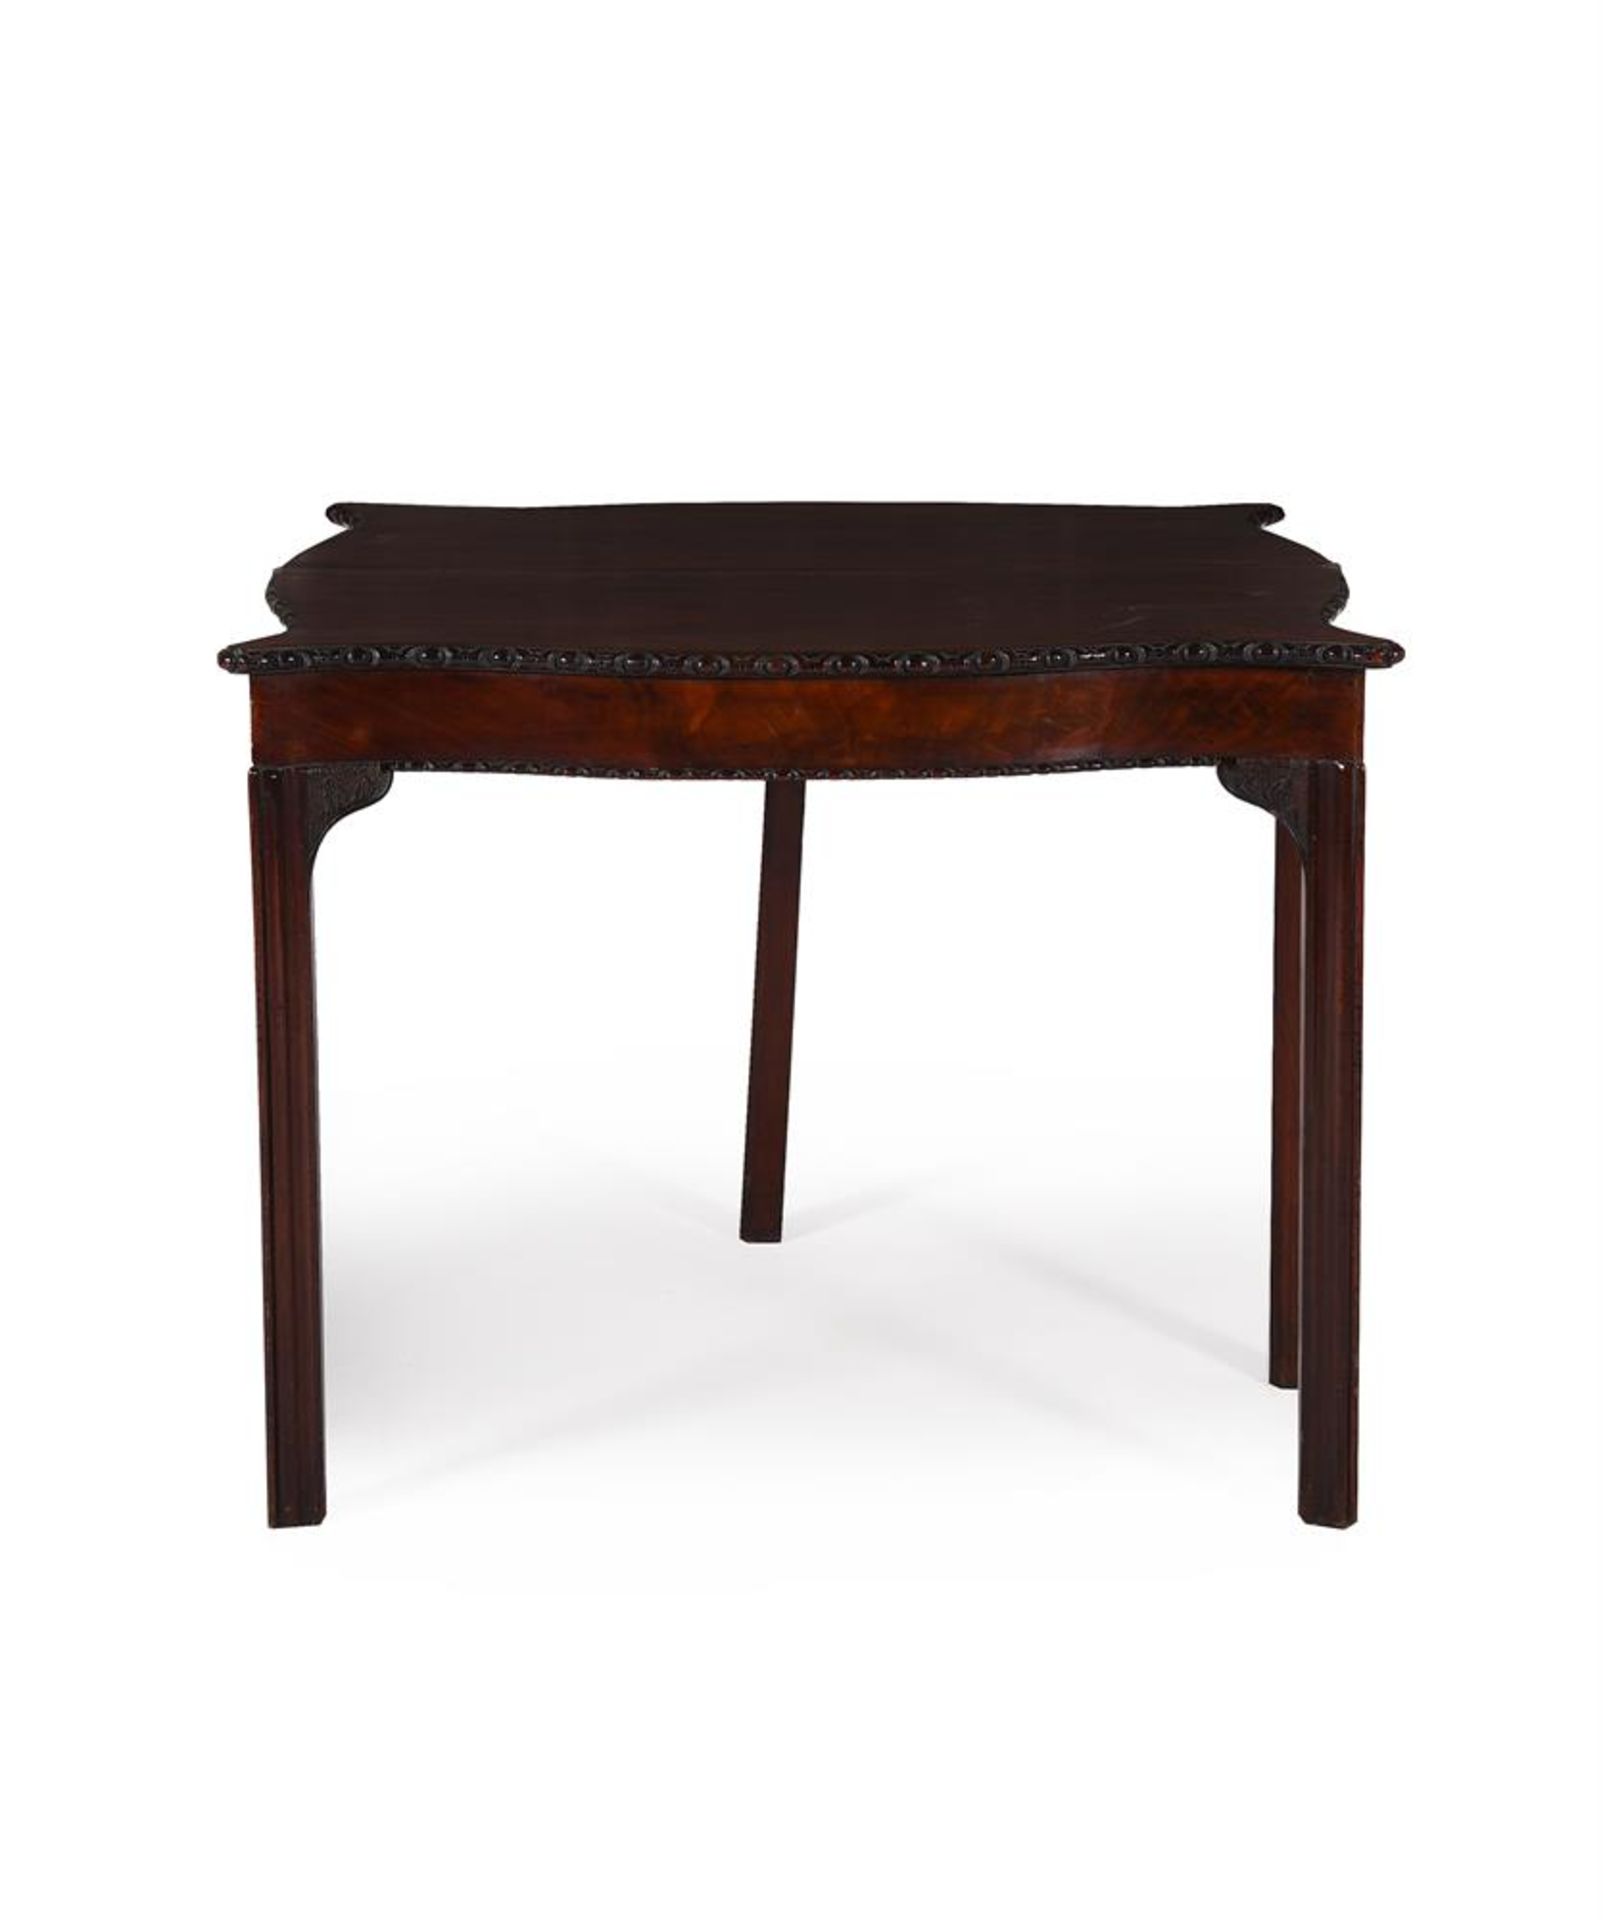 A GEORGE III MAHOGANY TEA TABLE, IN THE MANNER OF THOMAS CHIPPENDALE, LAST QUARTER 18TH CENTURY - Image 2 of 4